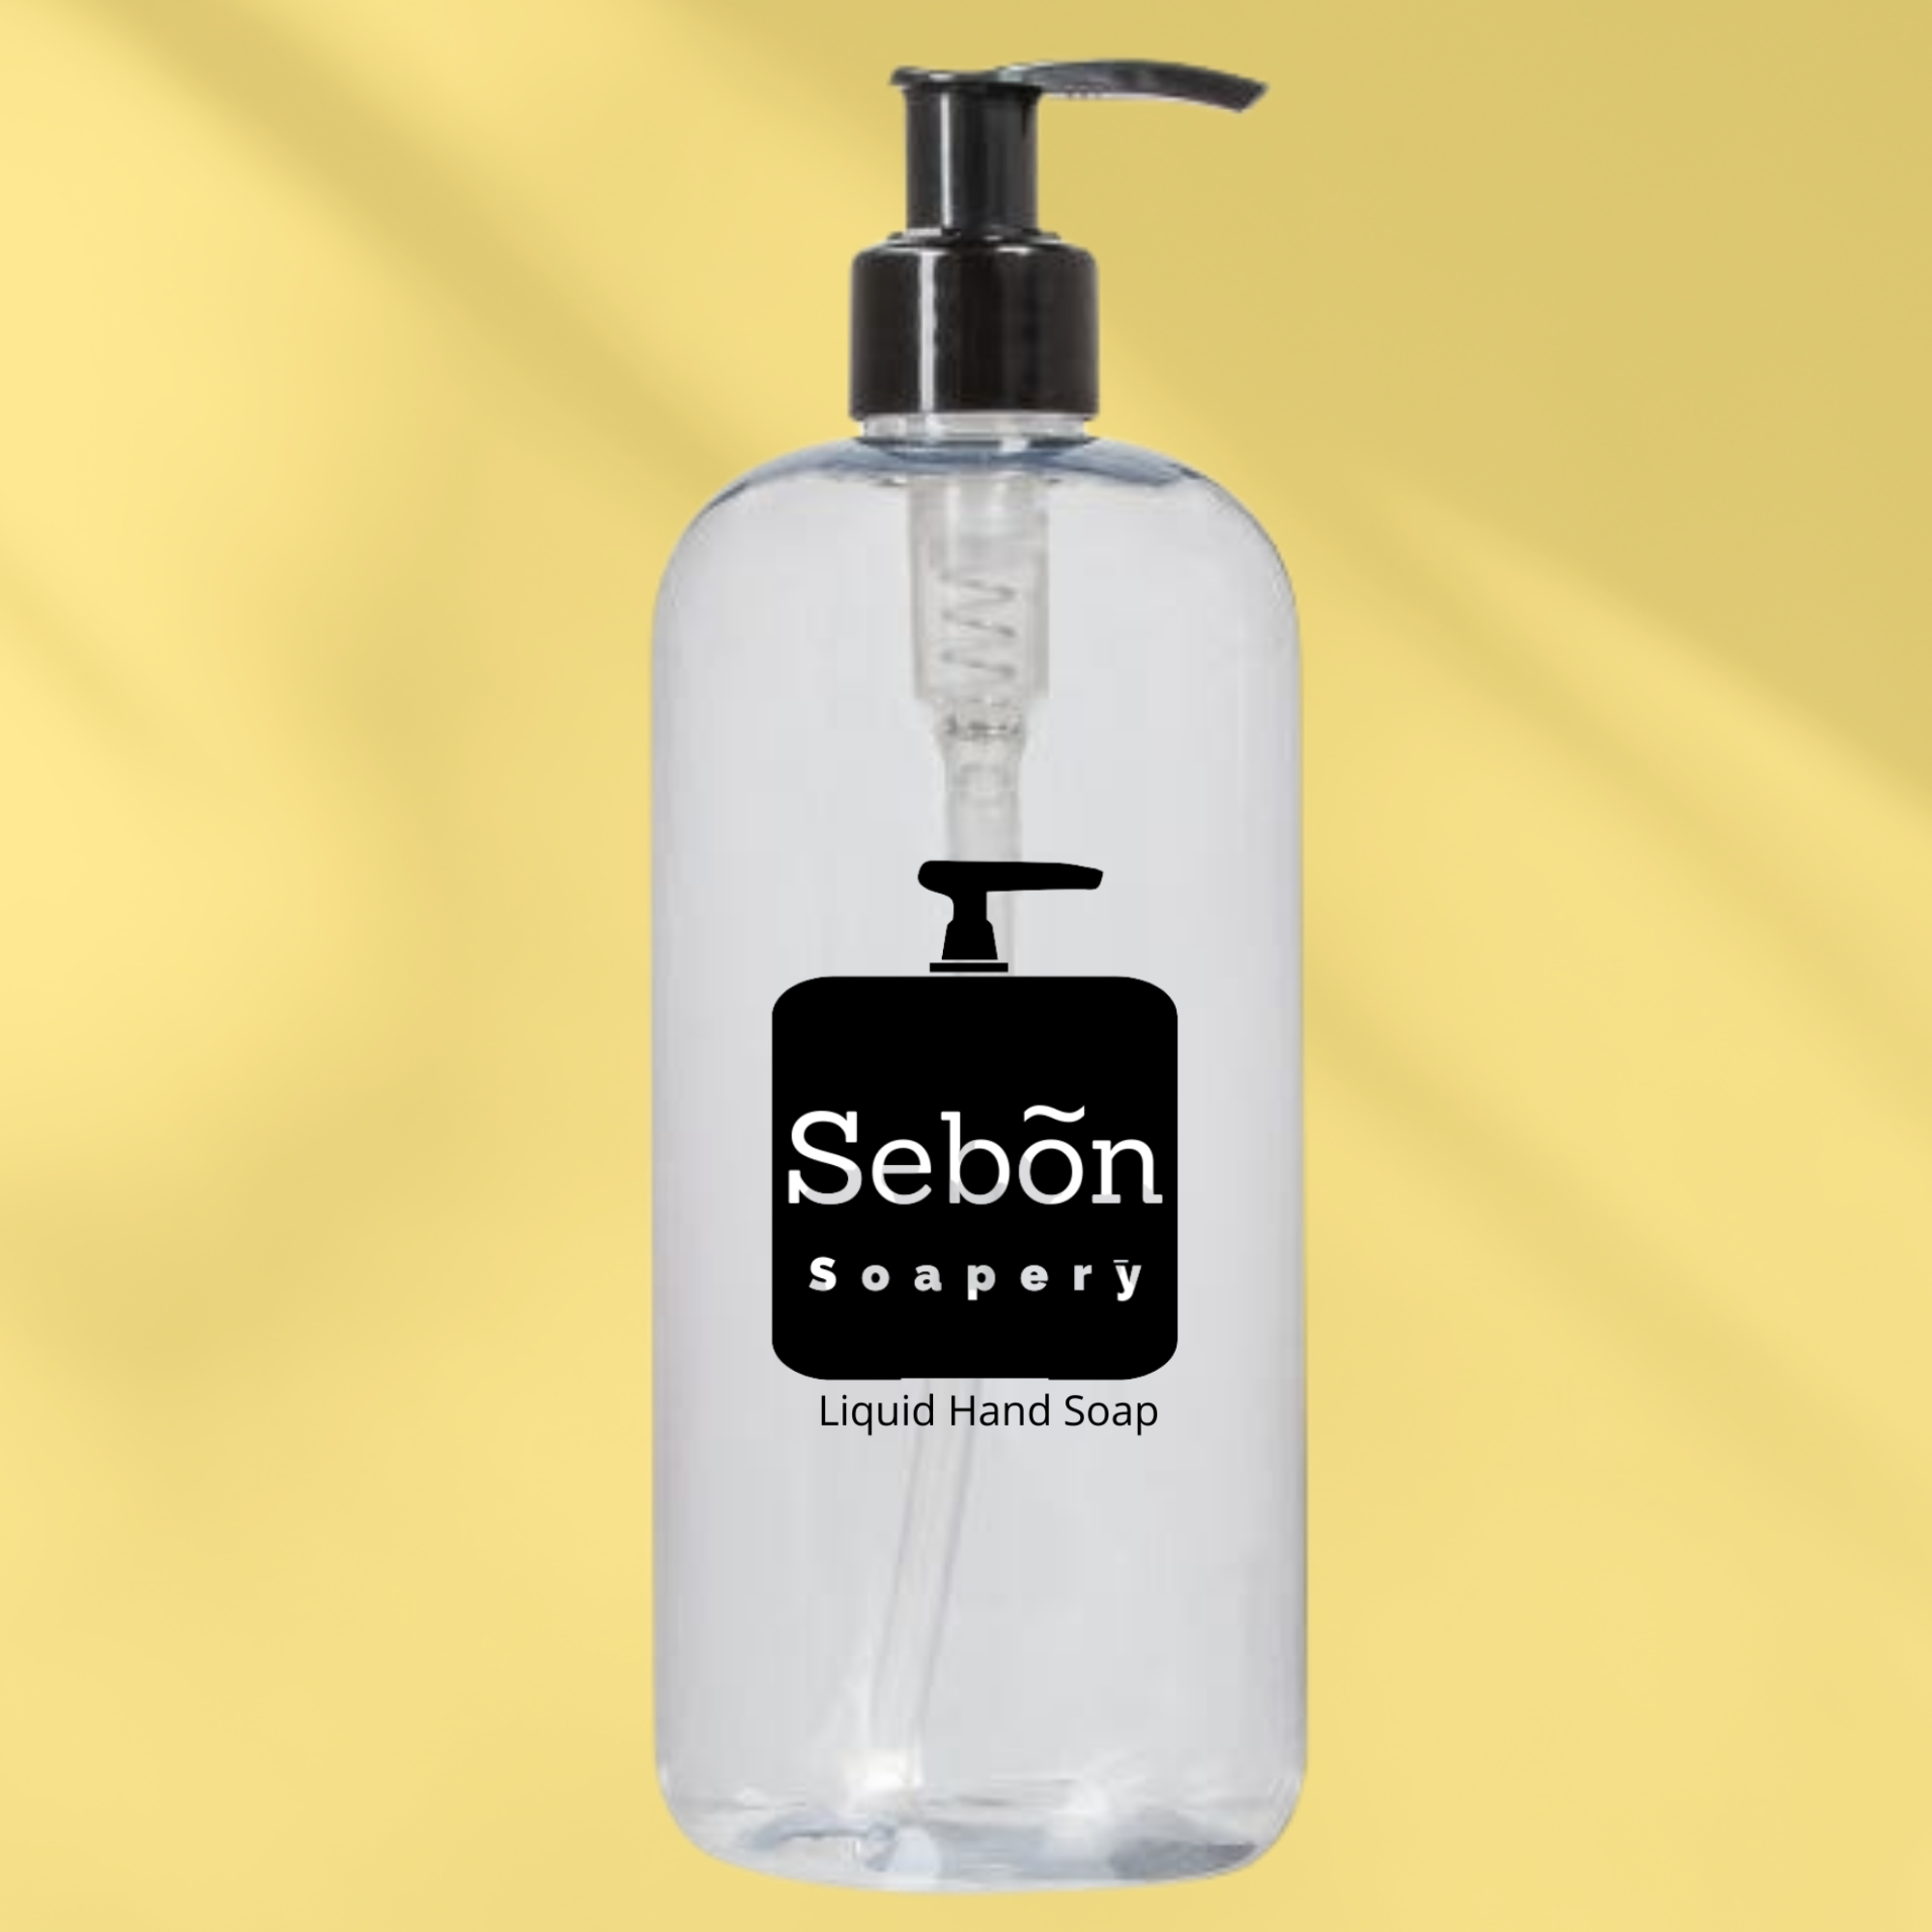 Sebon Benzoin & Sweetwood Scented Liquid Hand Soap with Olive Oil